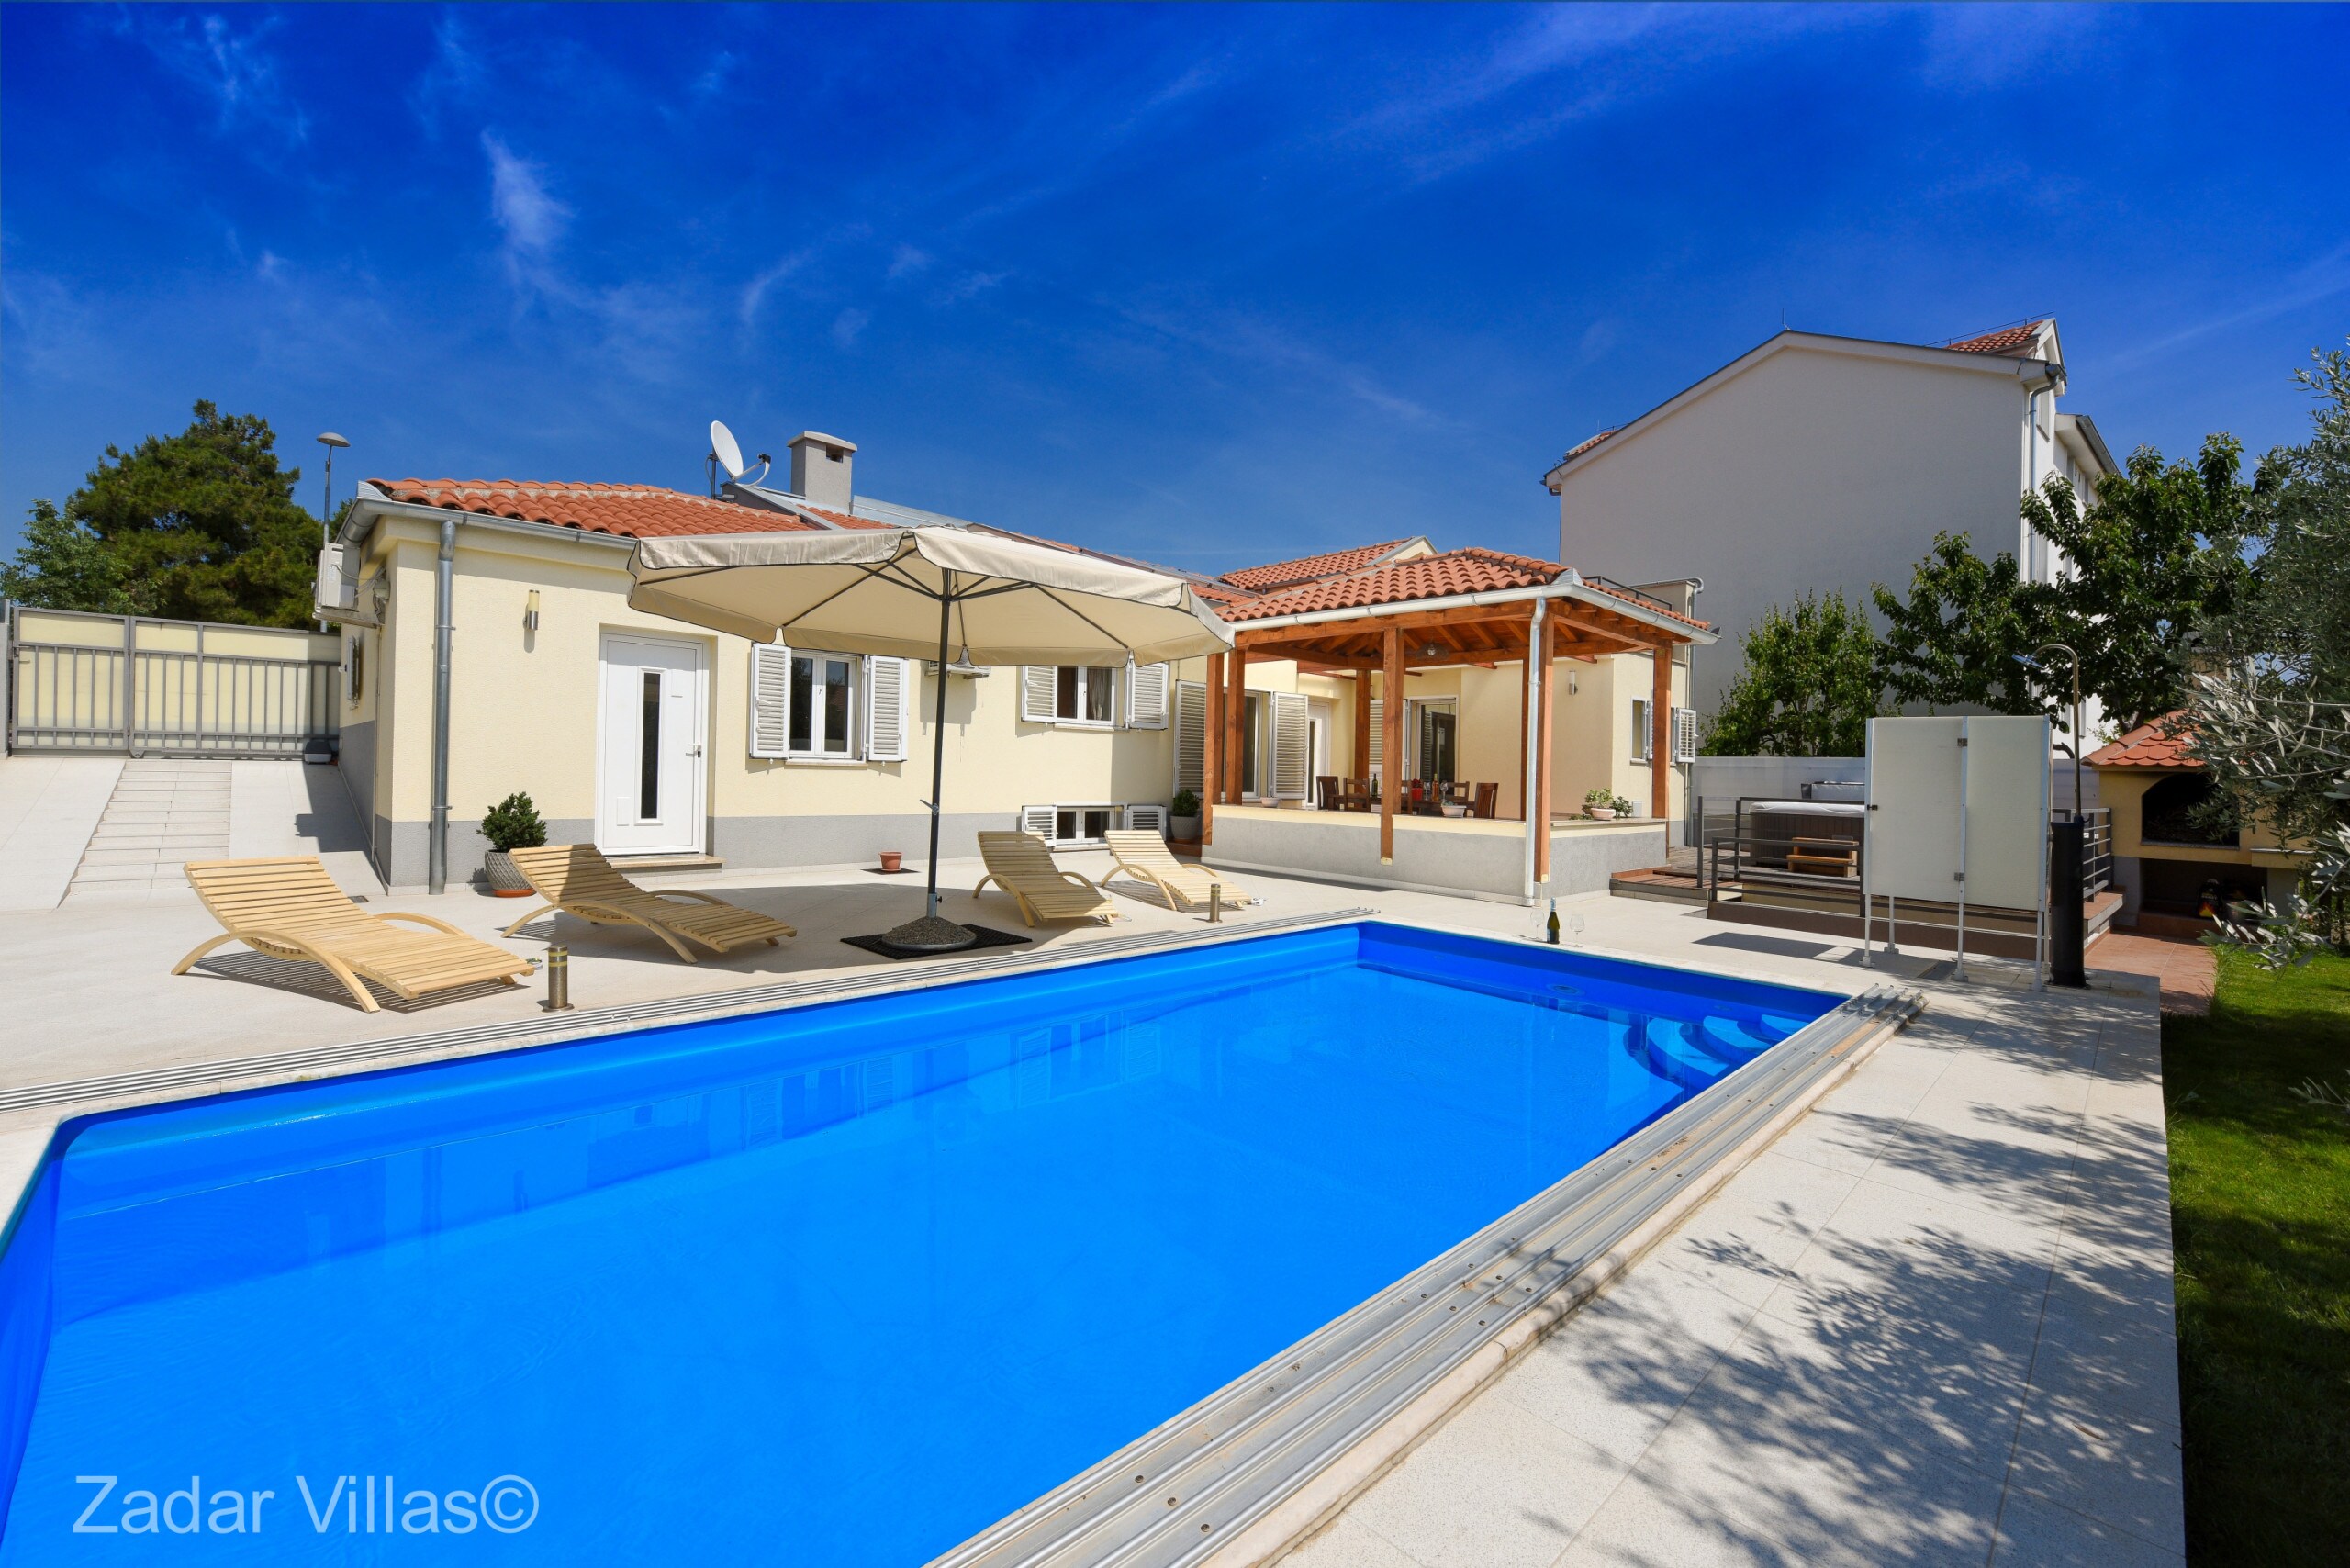 Property Image 2 - Outstanding Serene Villa with Al fresco Dining